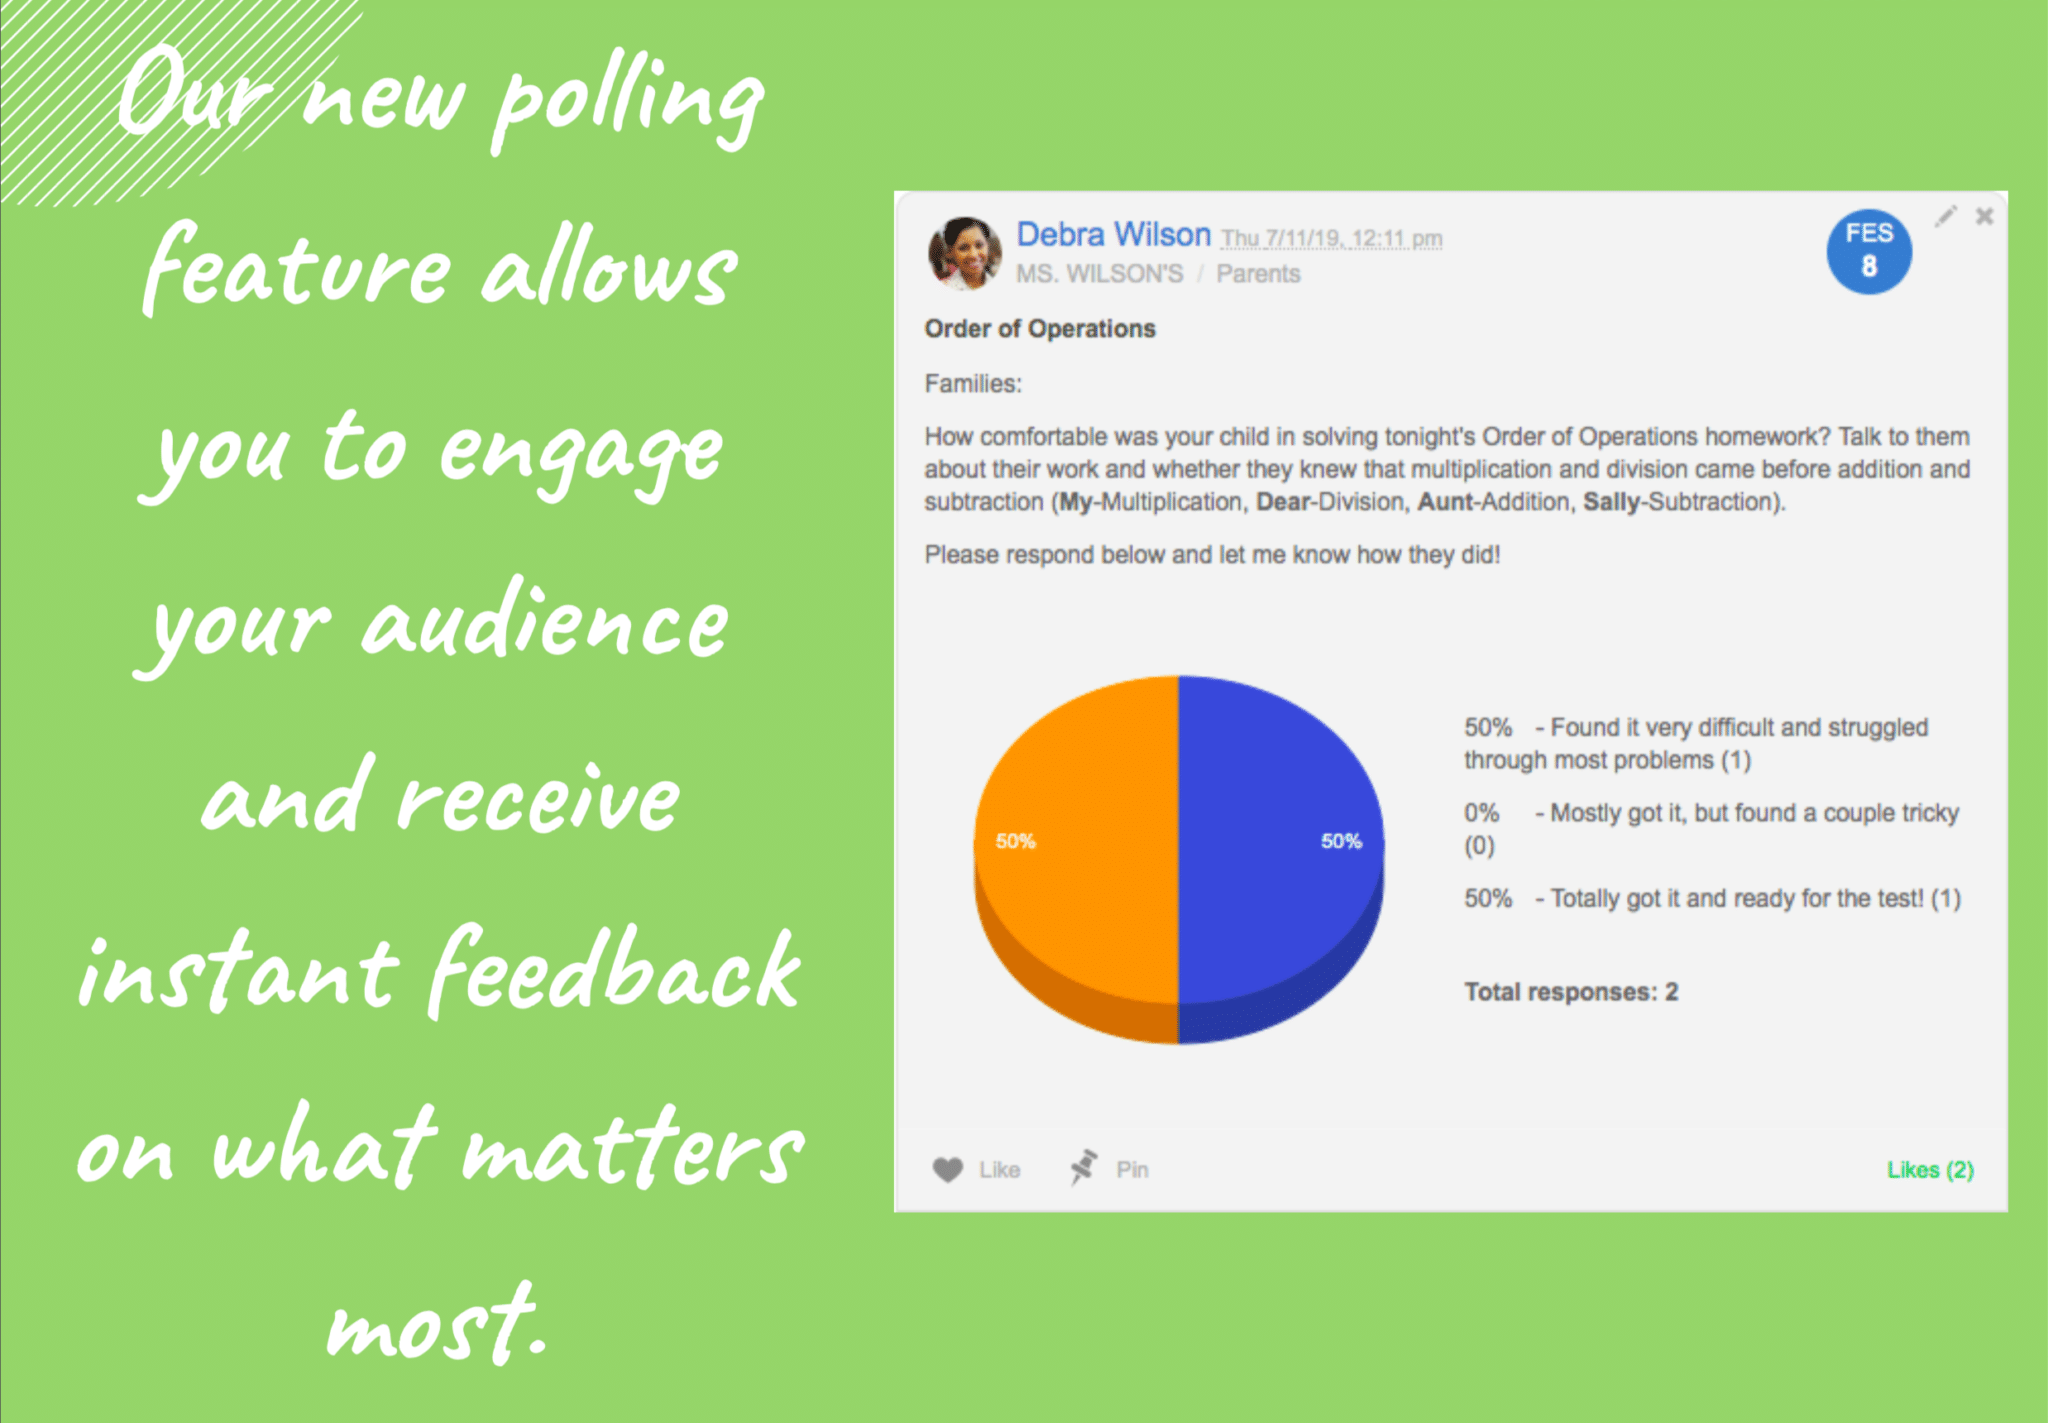 Polling allows you to engage and receive instant feedback on what matters most